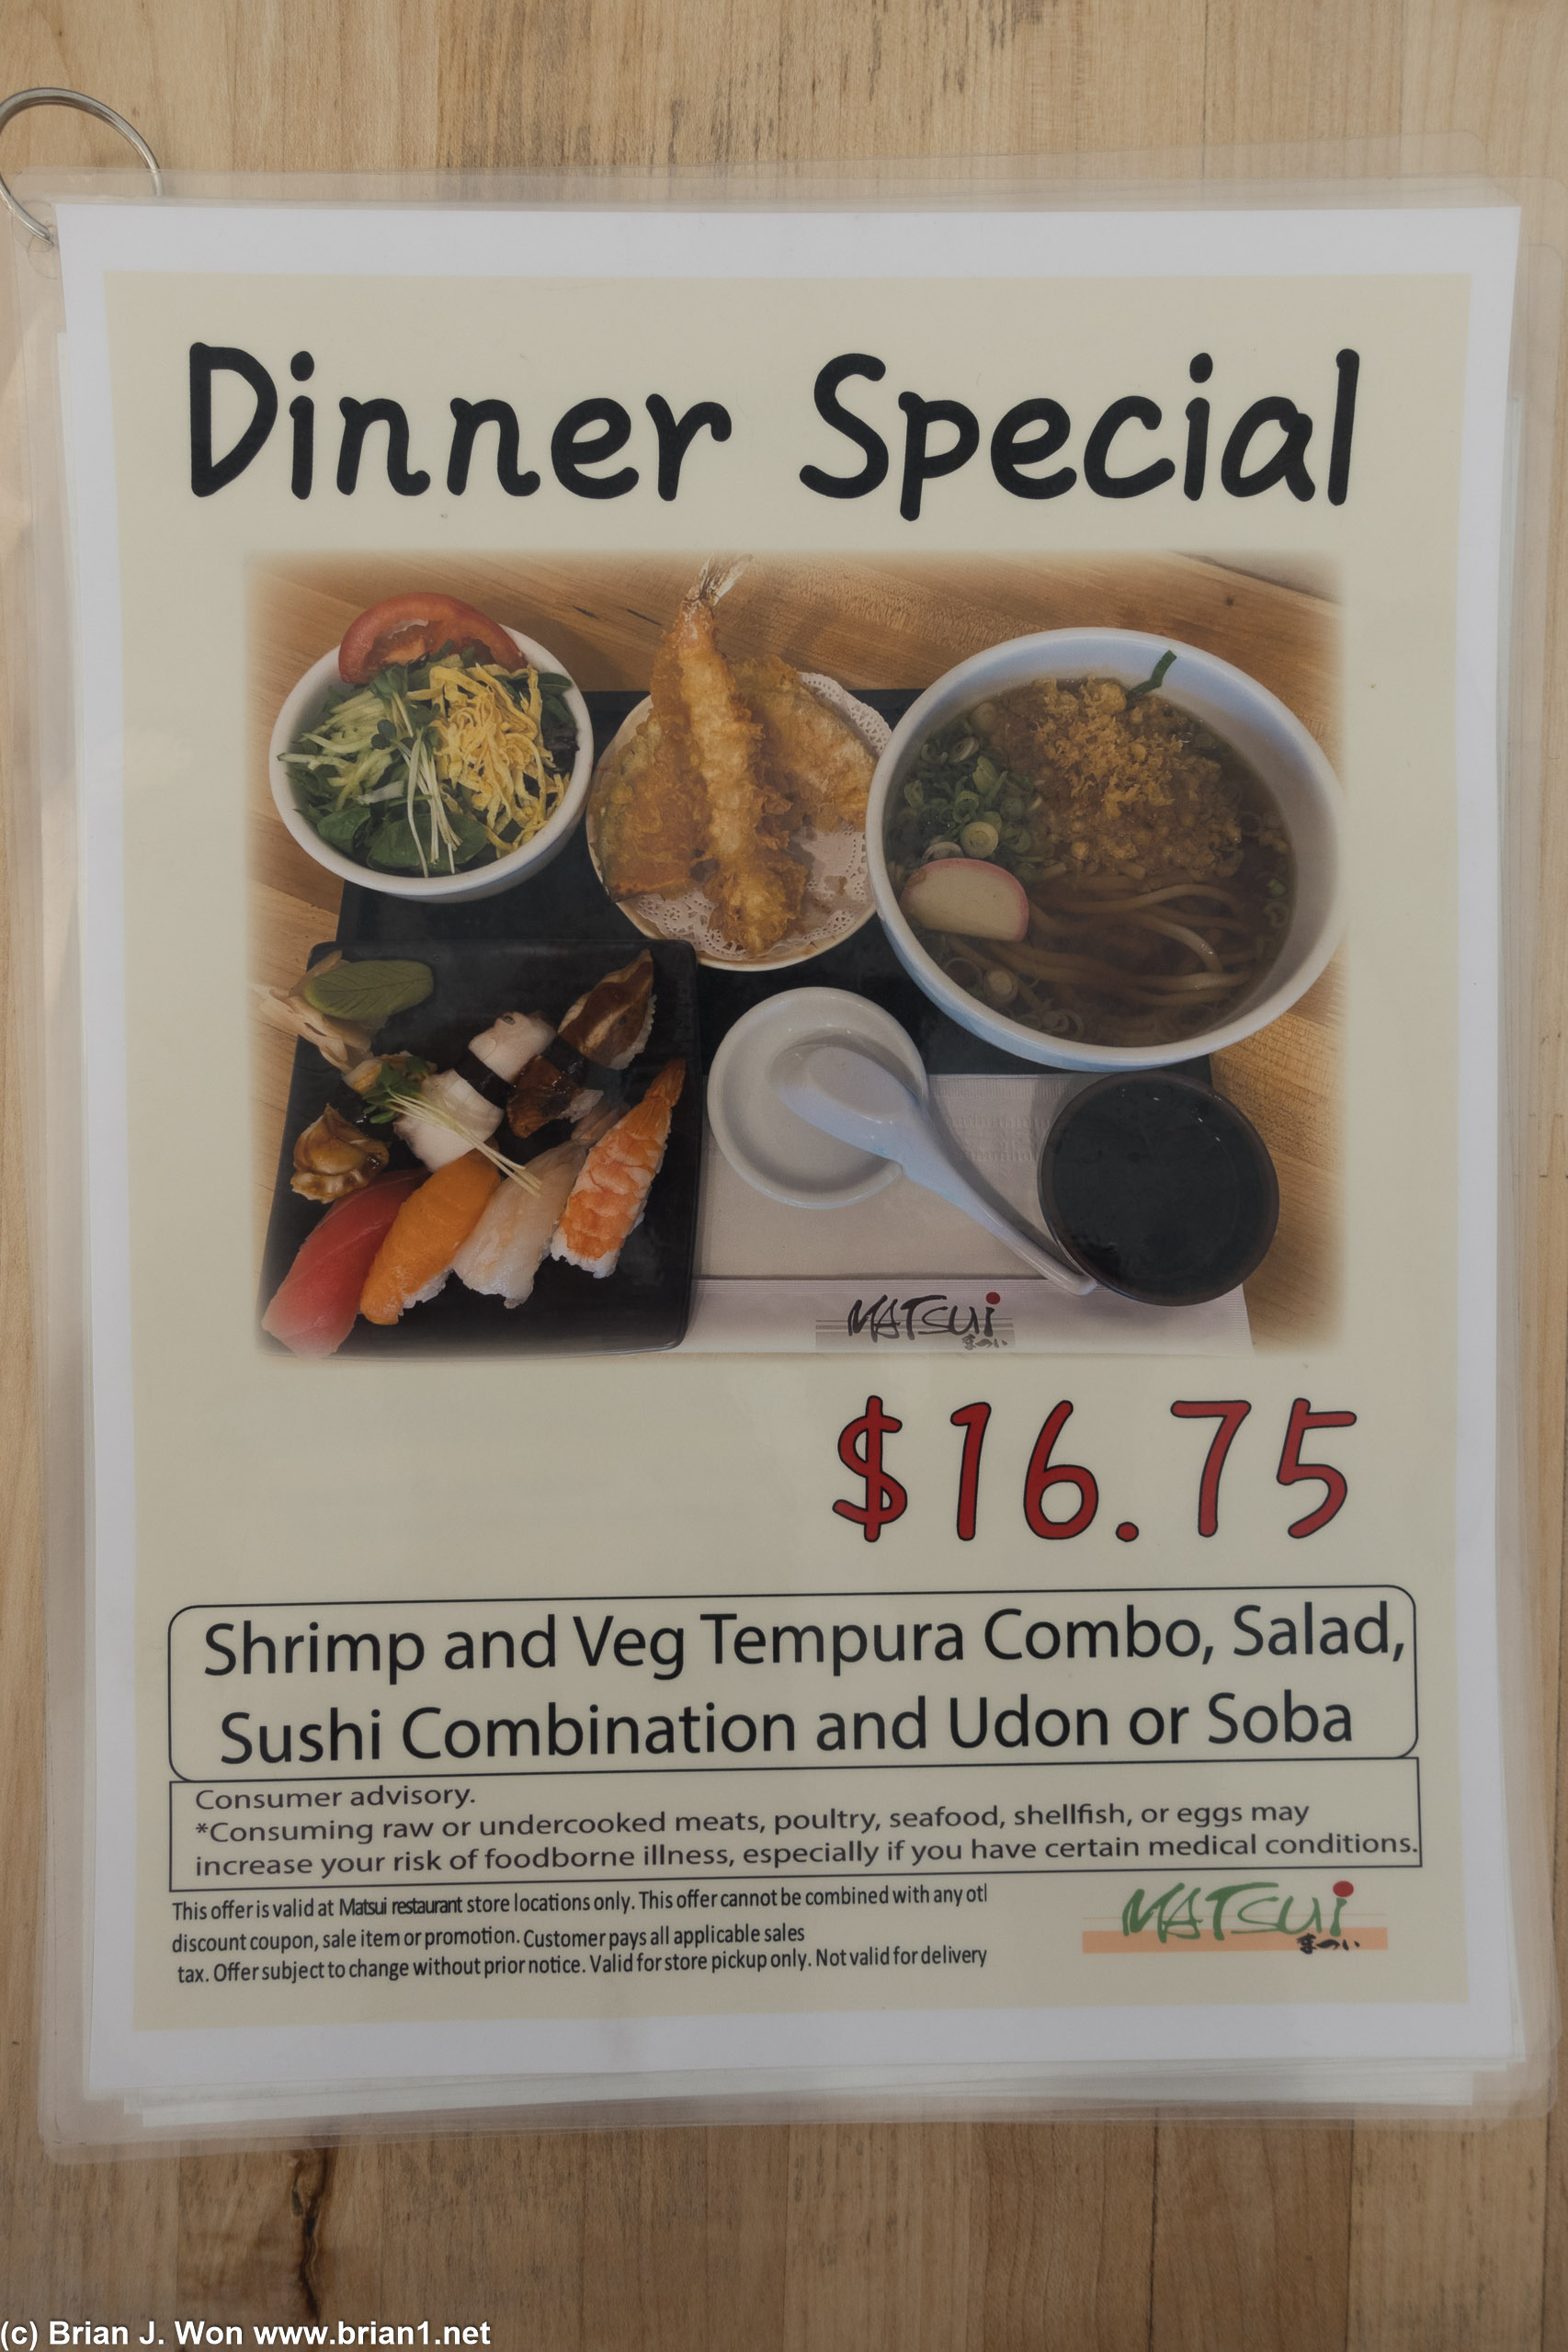 Dinner special yes please.